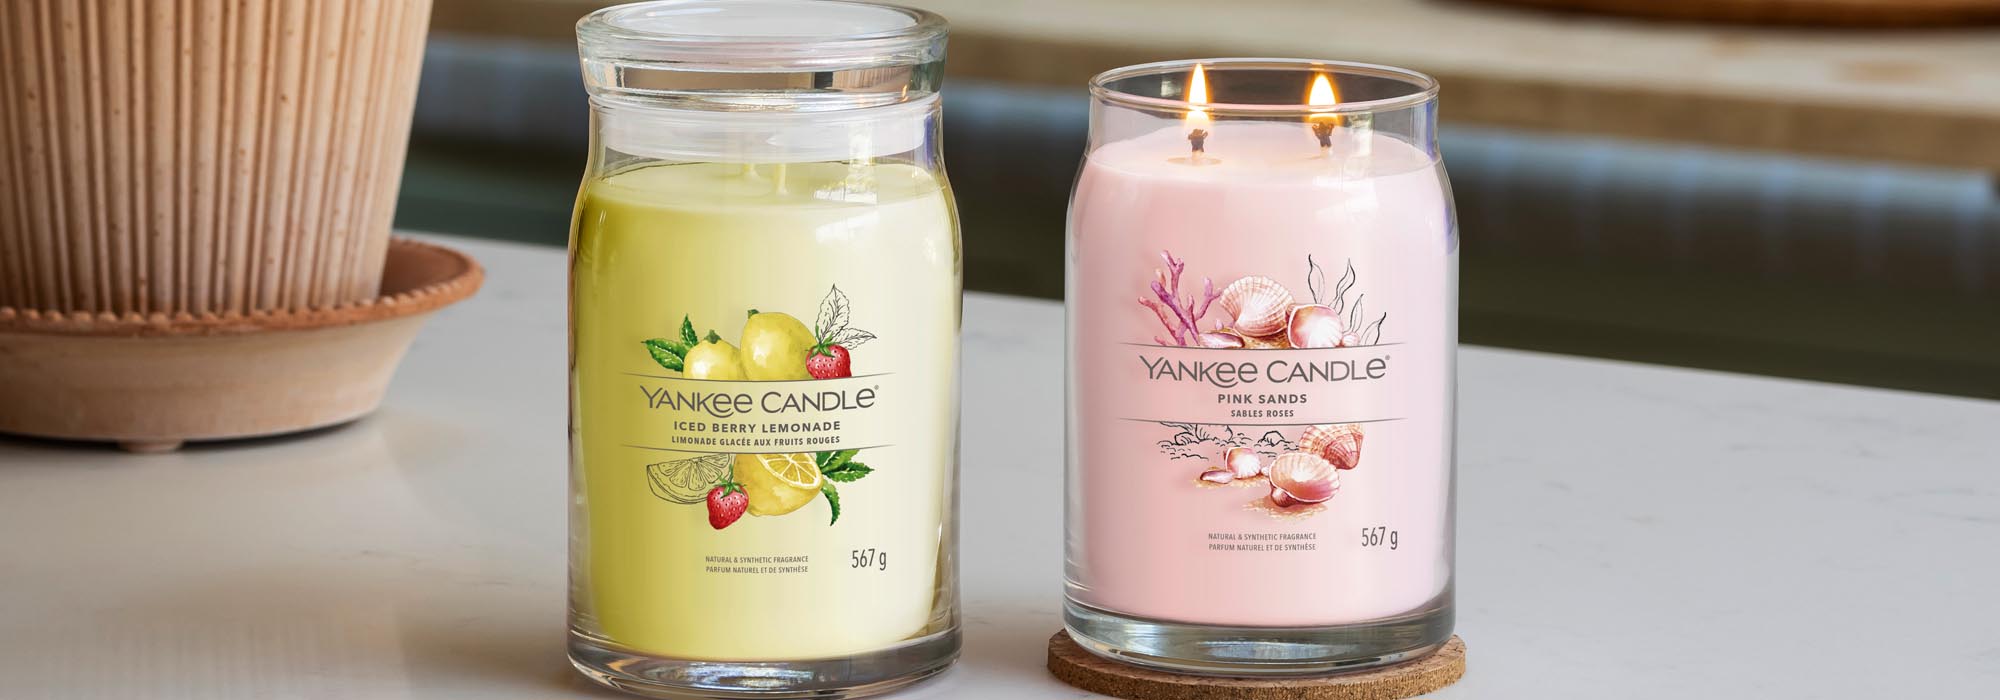 Yankee Candle® Fragrance of the Month